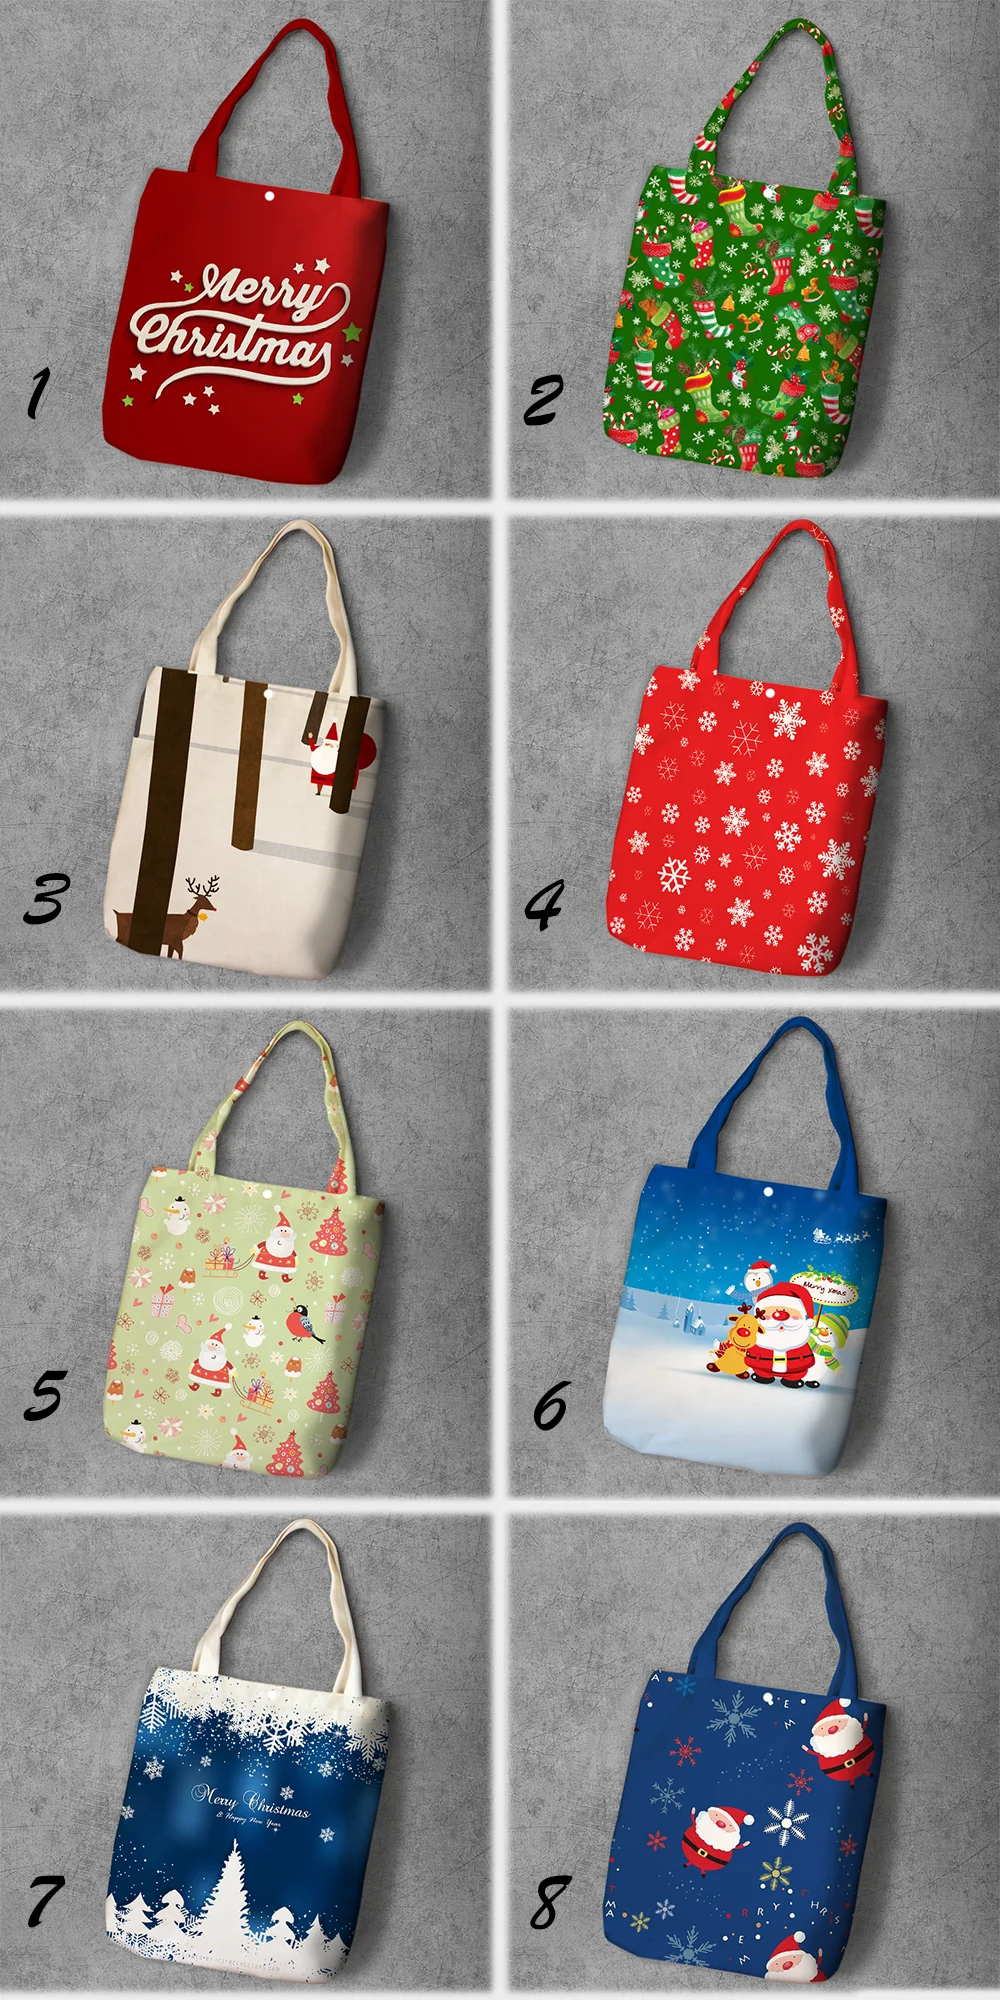 

Christmas Festival Student Printed Recycle Canvas Shopping Bag Large Capacity Customize Tote Fashion Ladies Casual Shoulder Bags